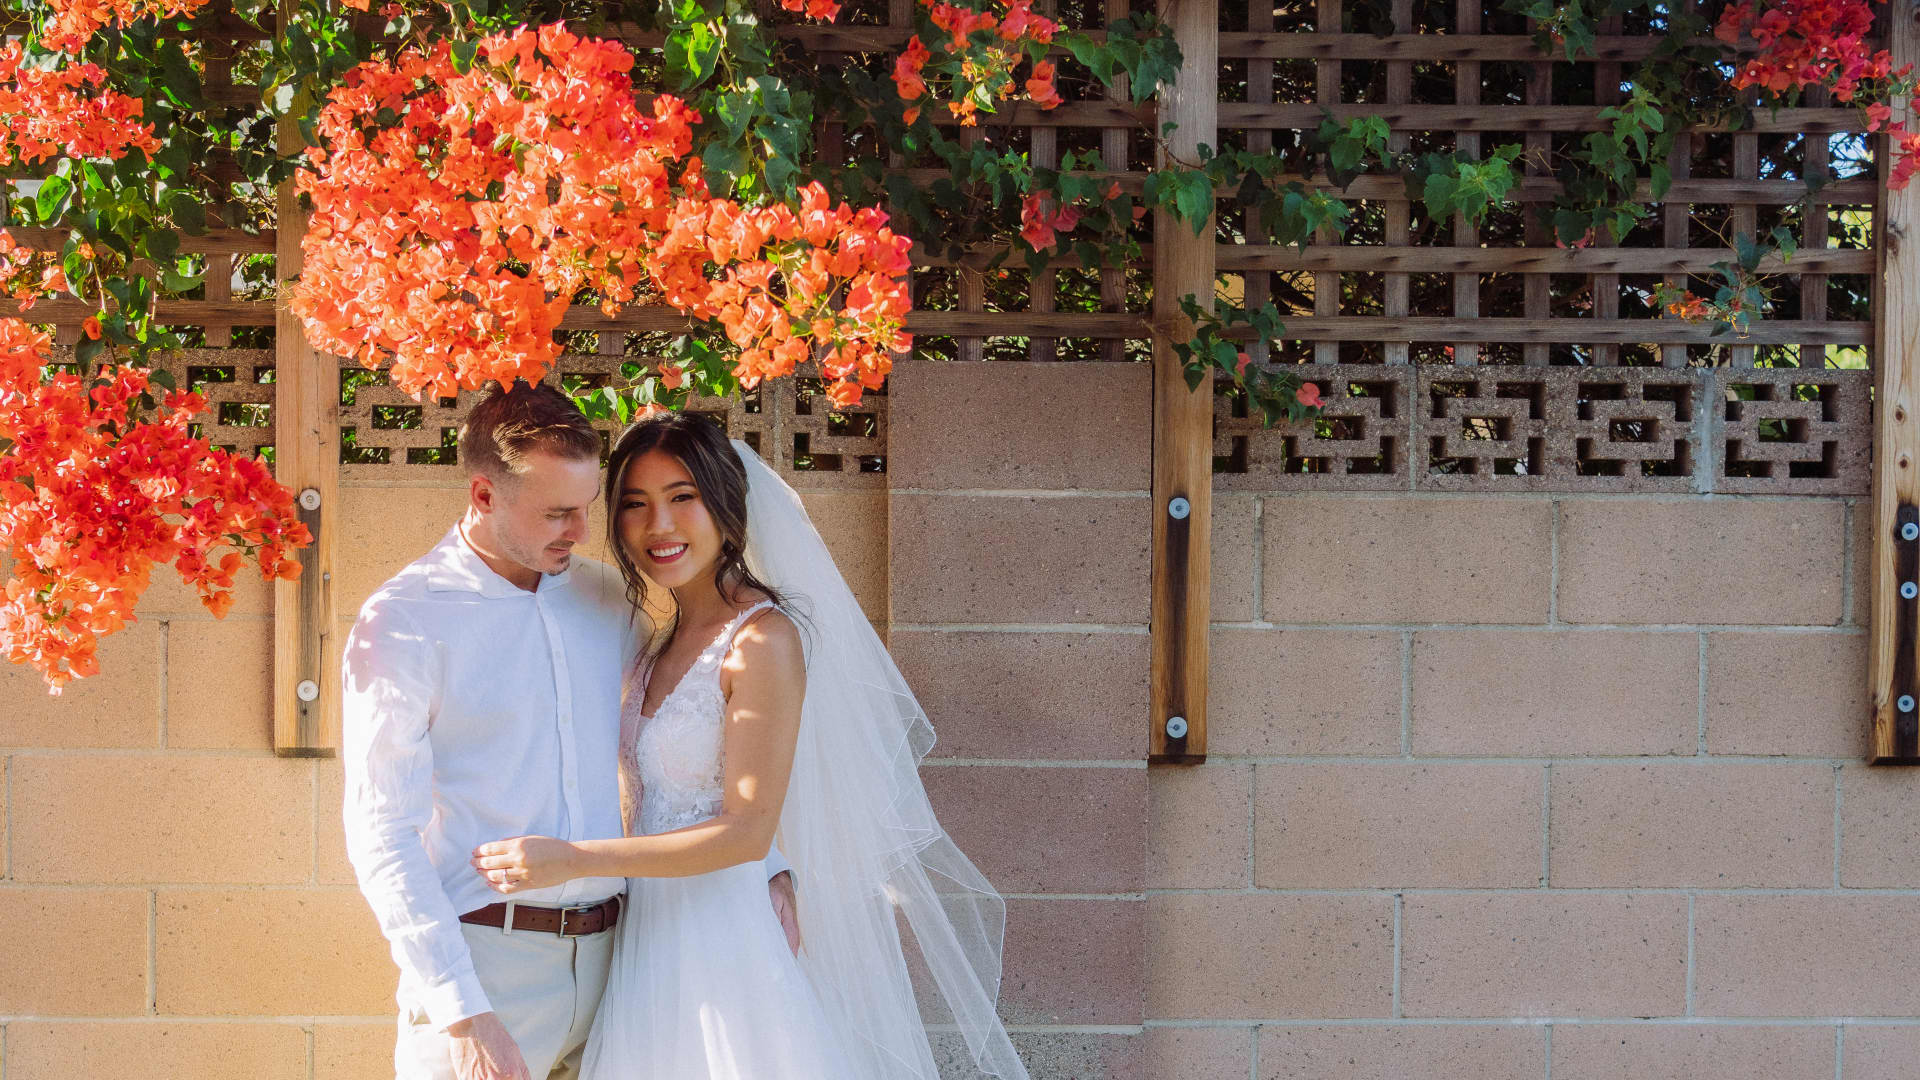 Kim Liao and her husband in front of a flower wall she handmade for her wedding.